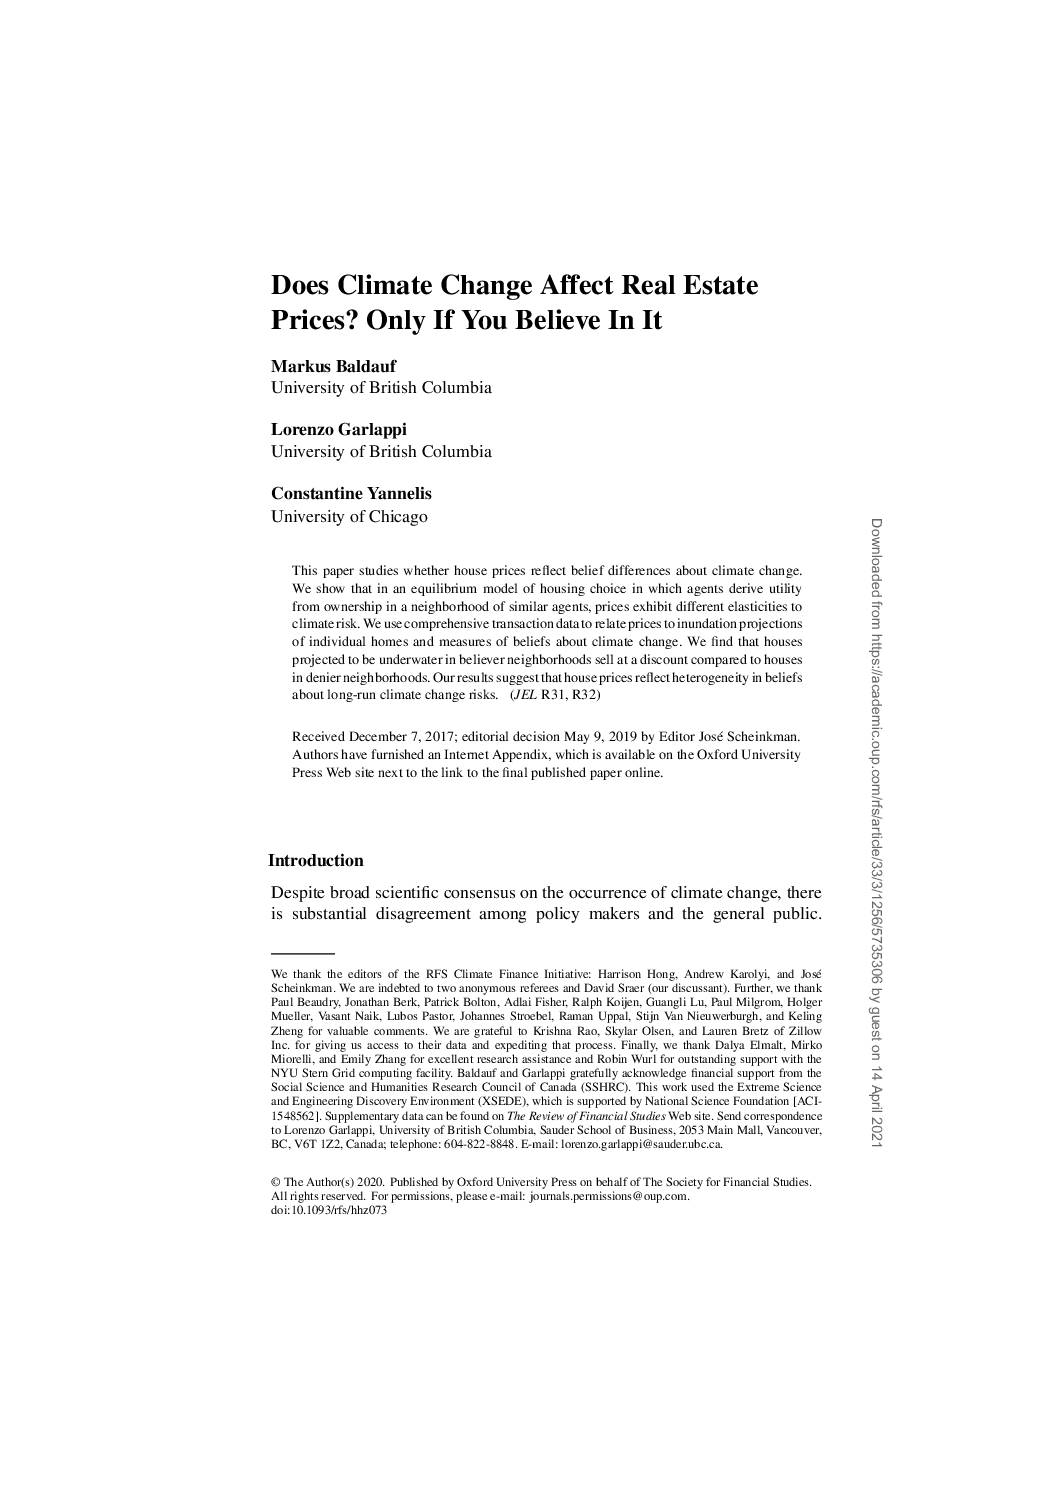 Does Climate Change Affect Real Estate Prices?